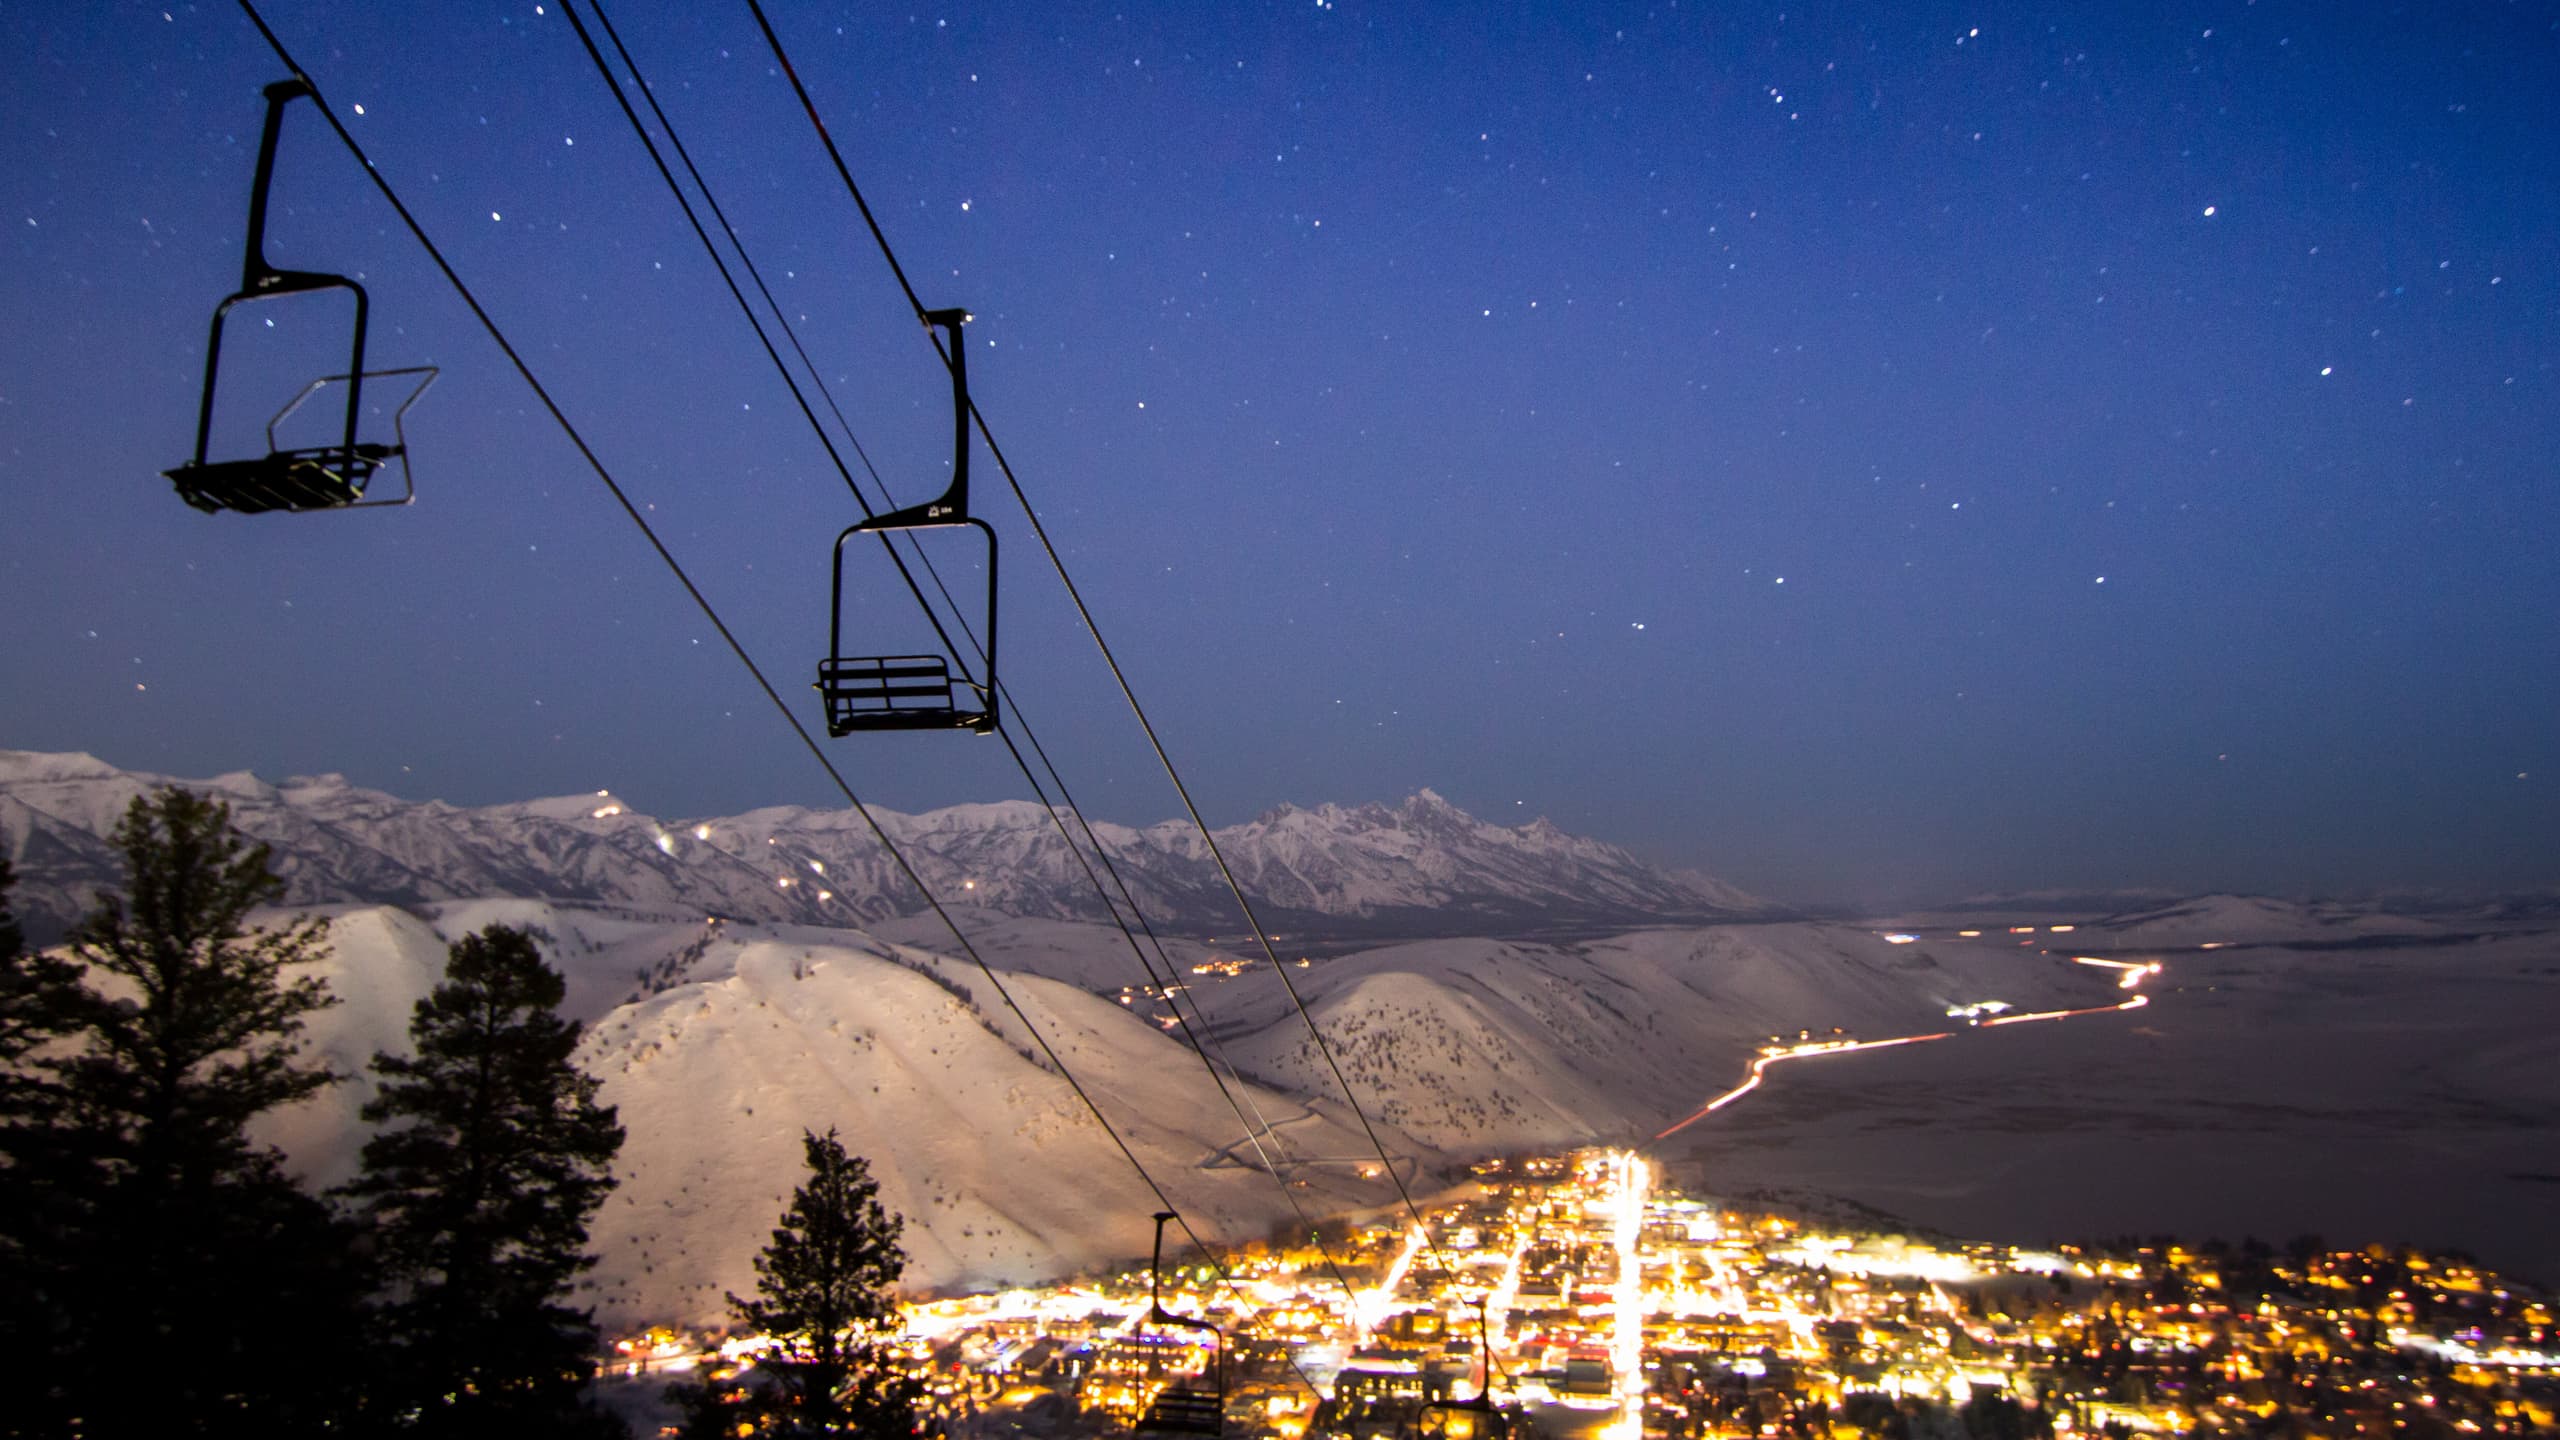 Jackson Hole from Snow King At Night